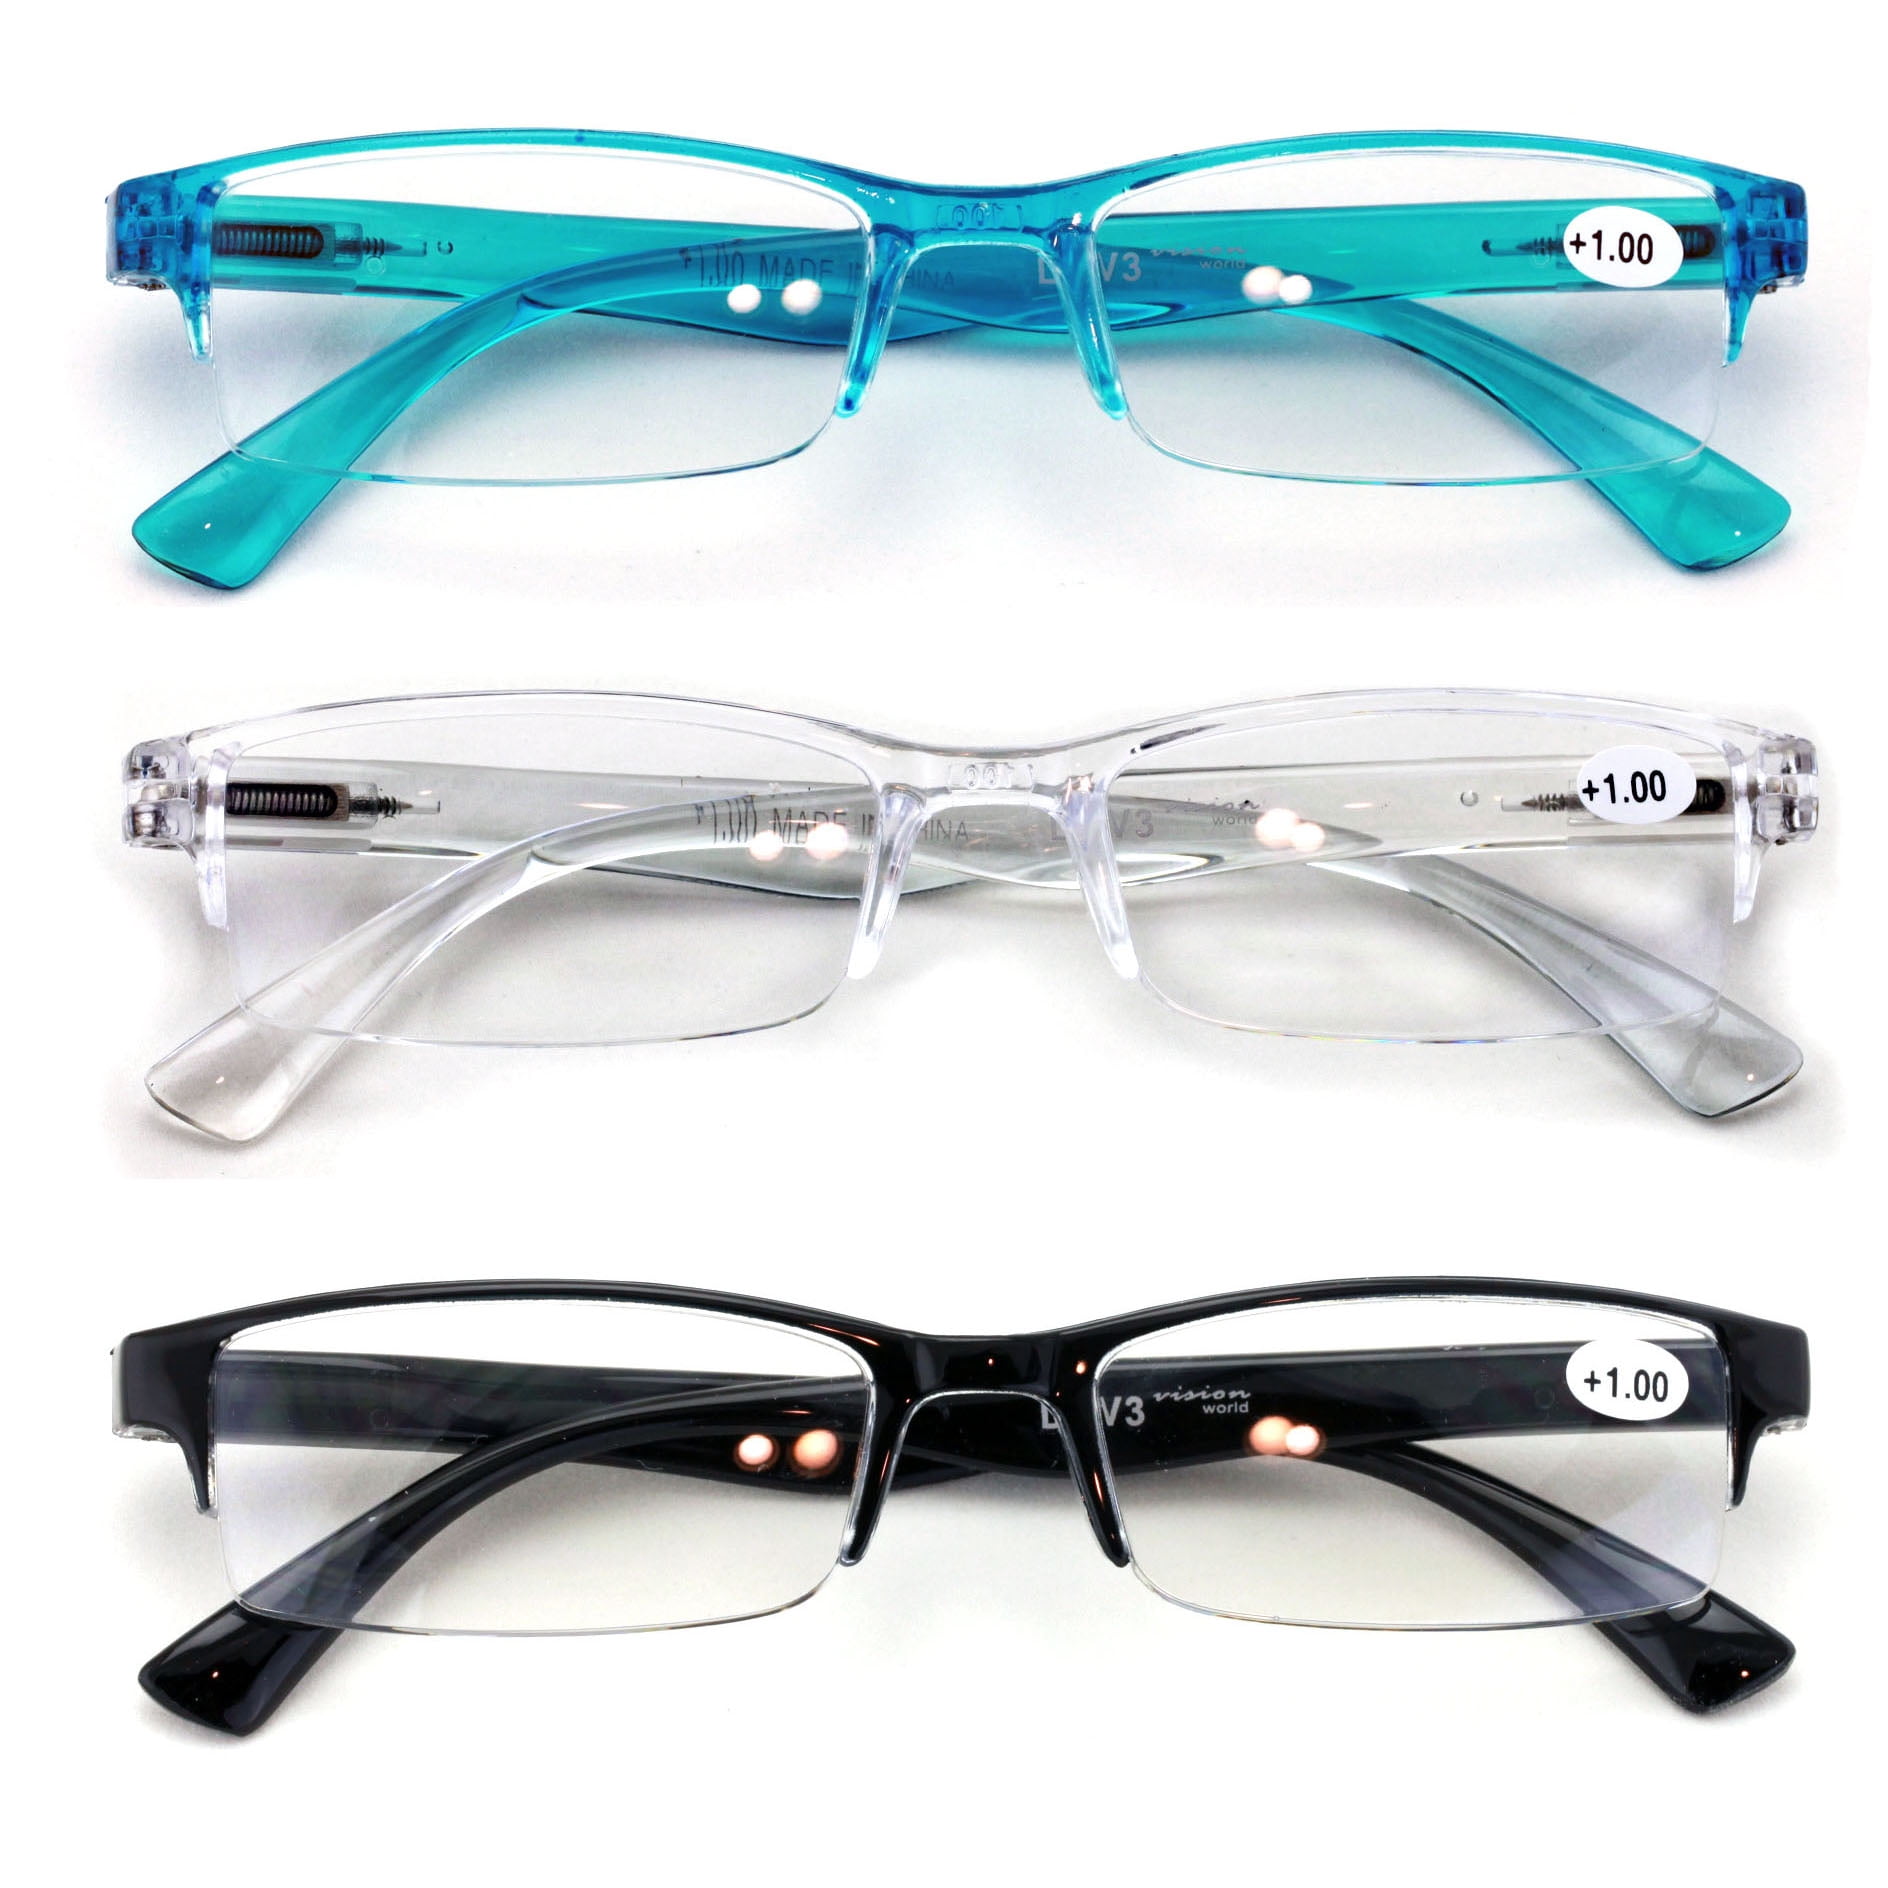 3-Pack Rectangular Reading Glasses with Spring-Hinges 